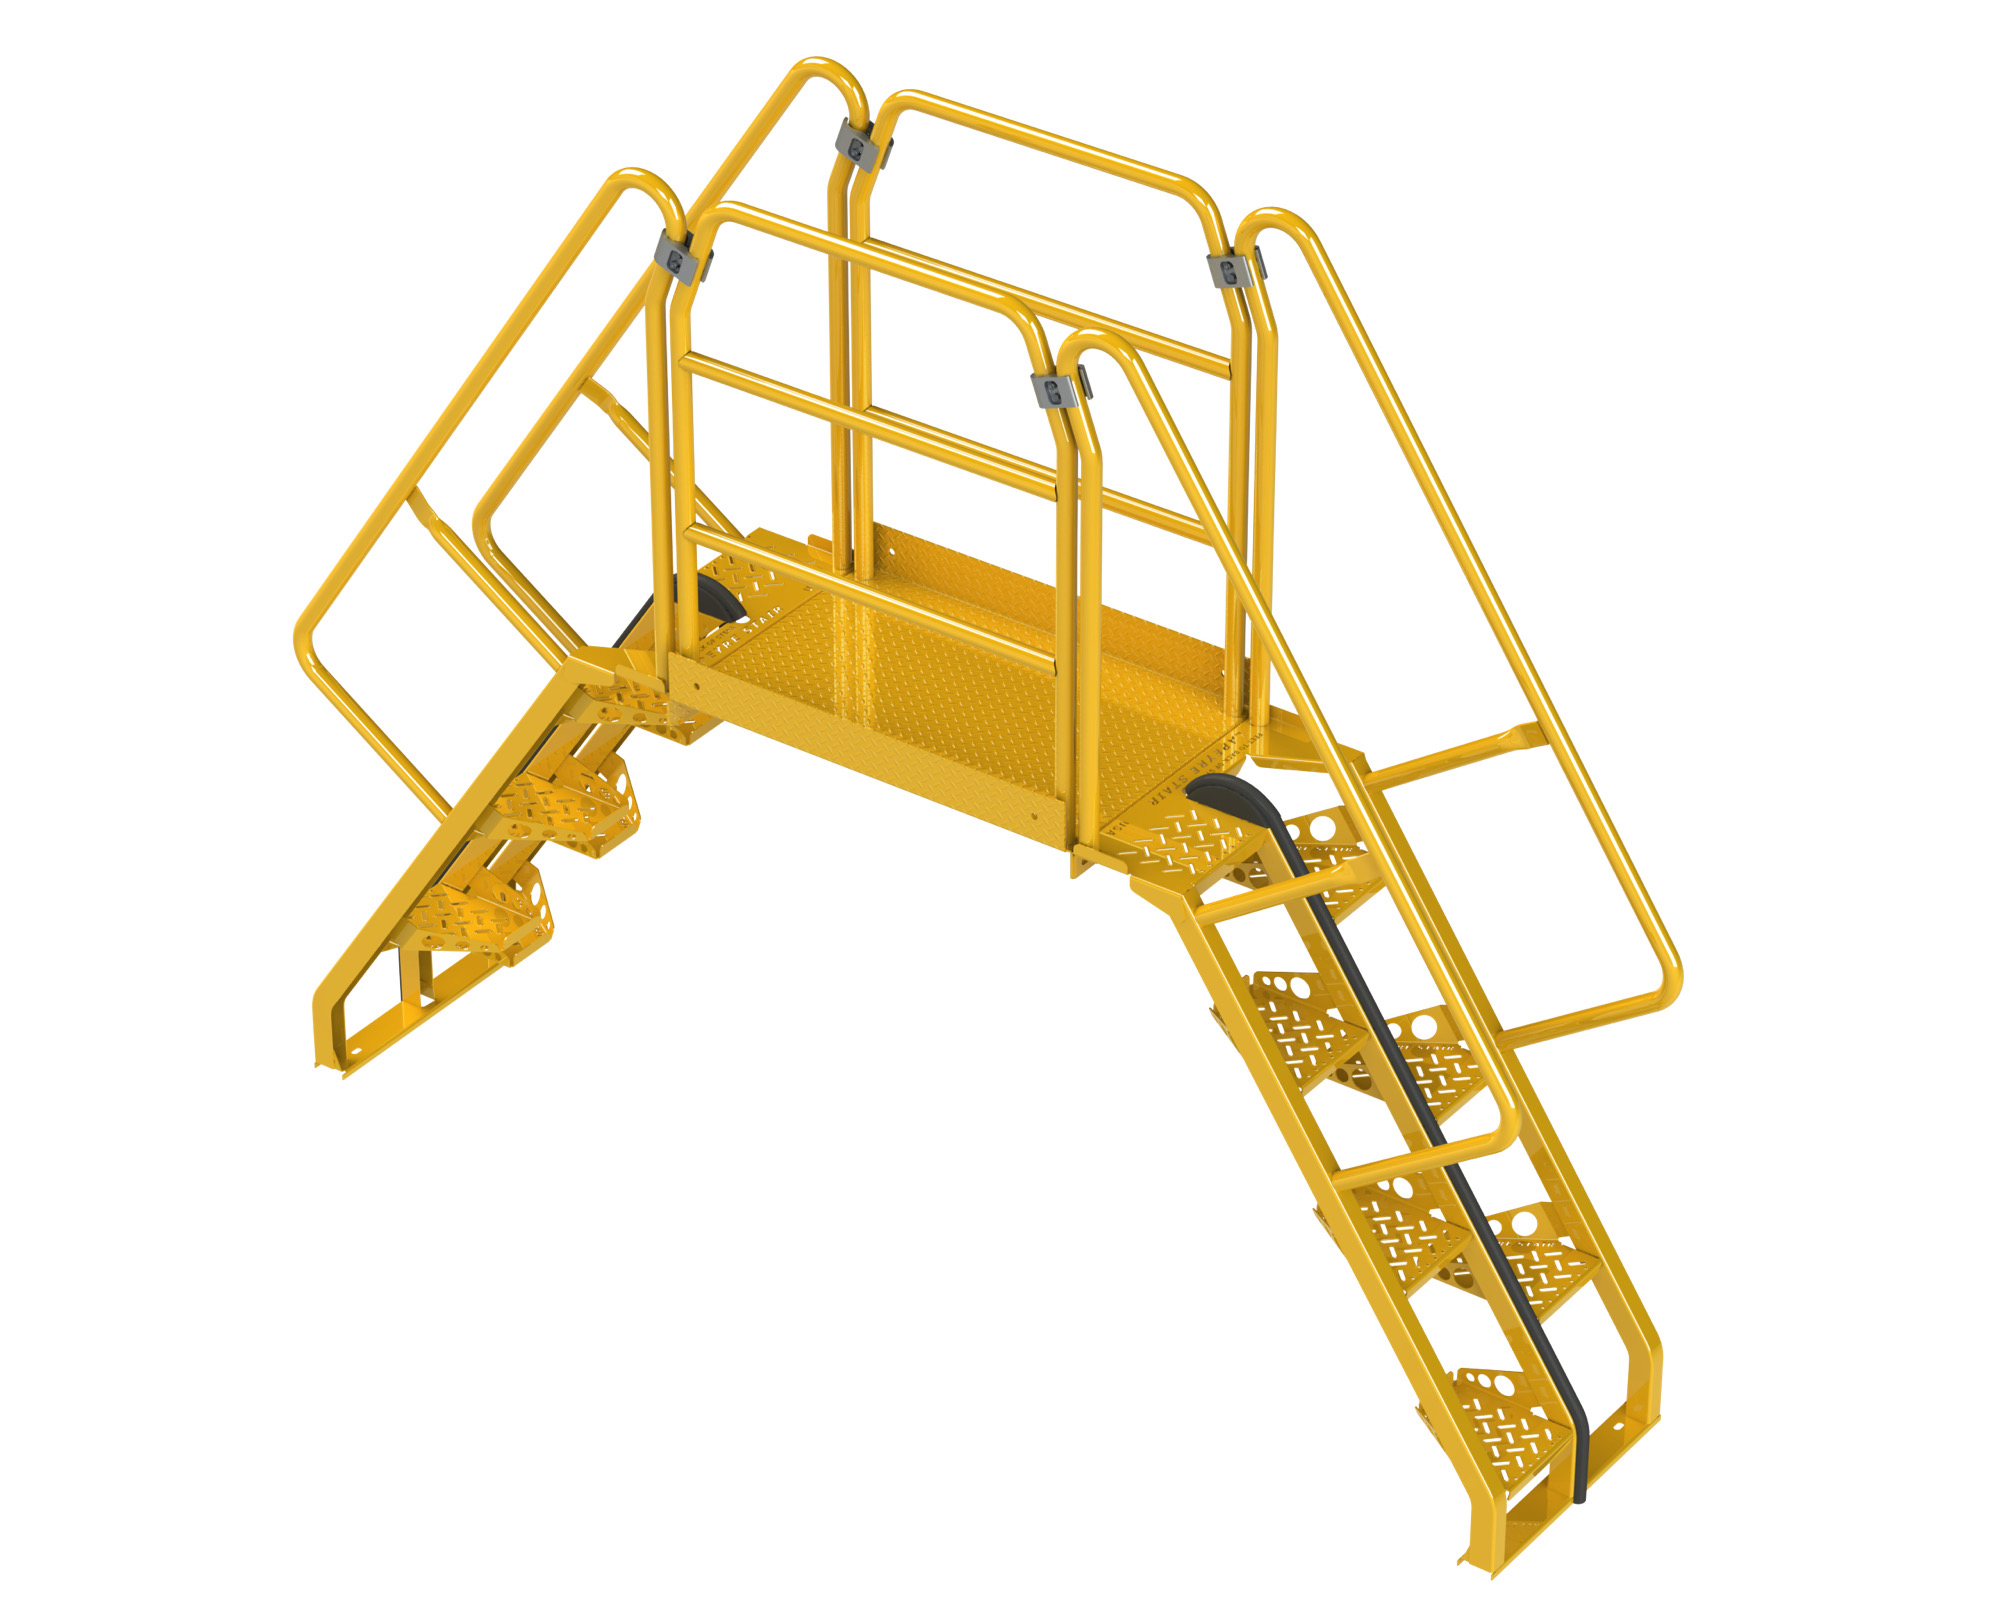 Crossover Stairs, Alternating Tread, Steel, Safety Yellow, Perforated, 56 Degree